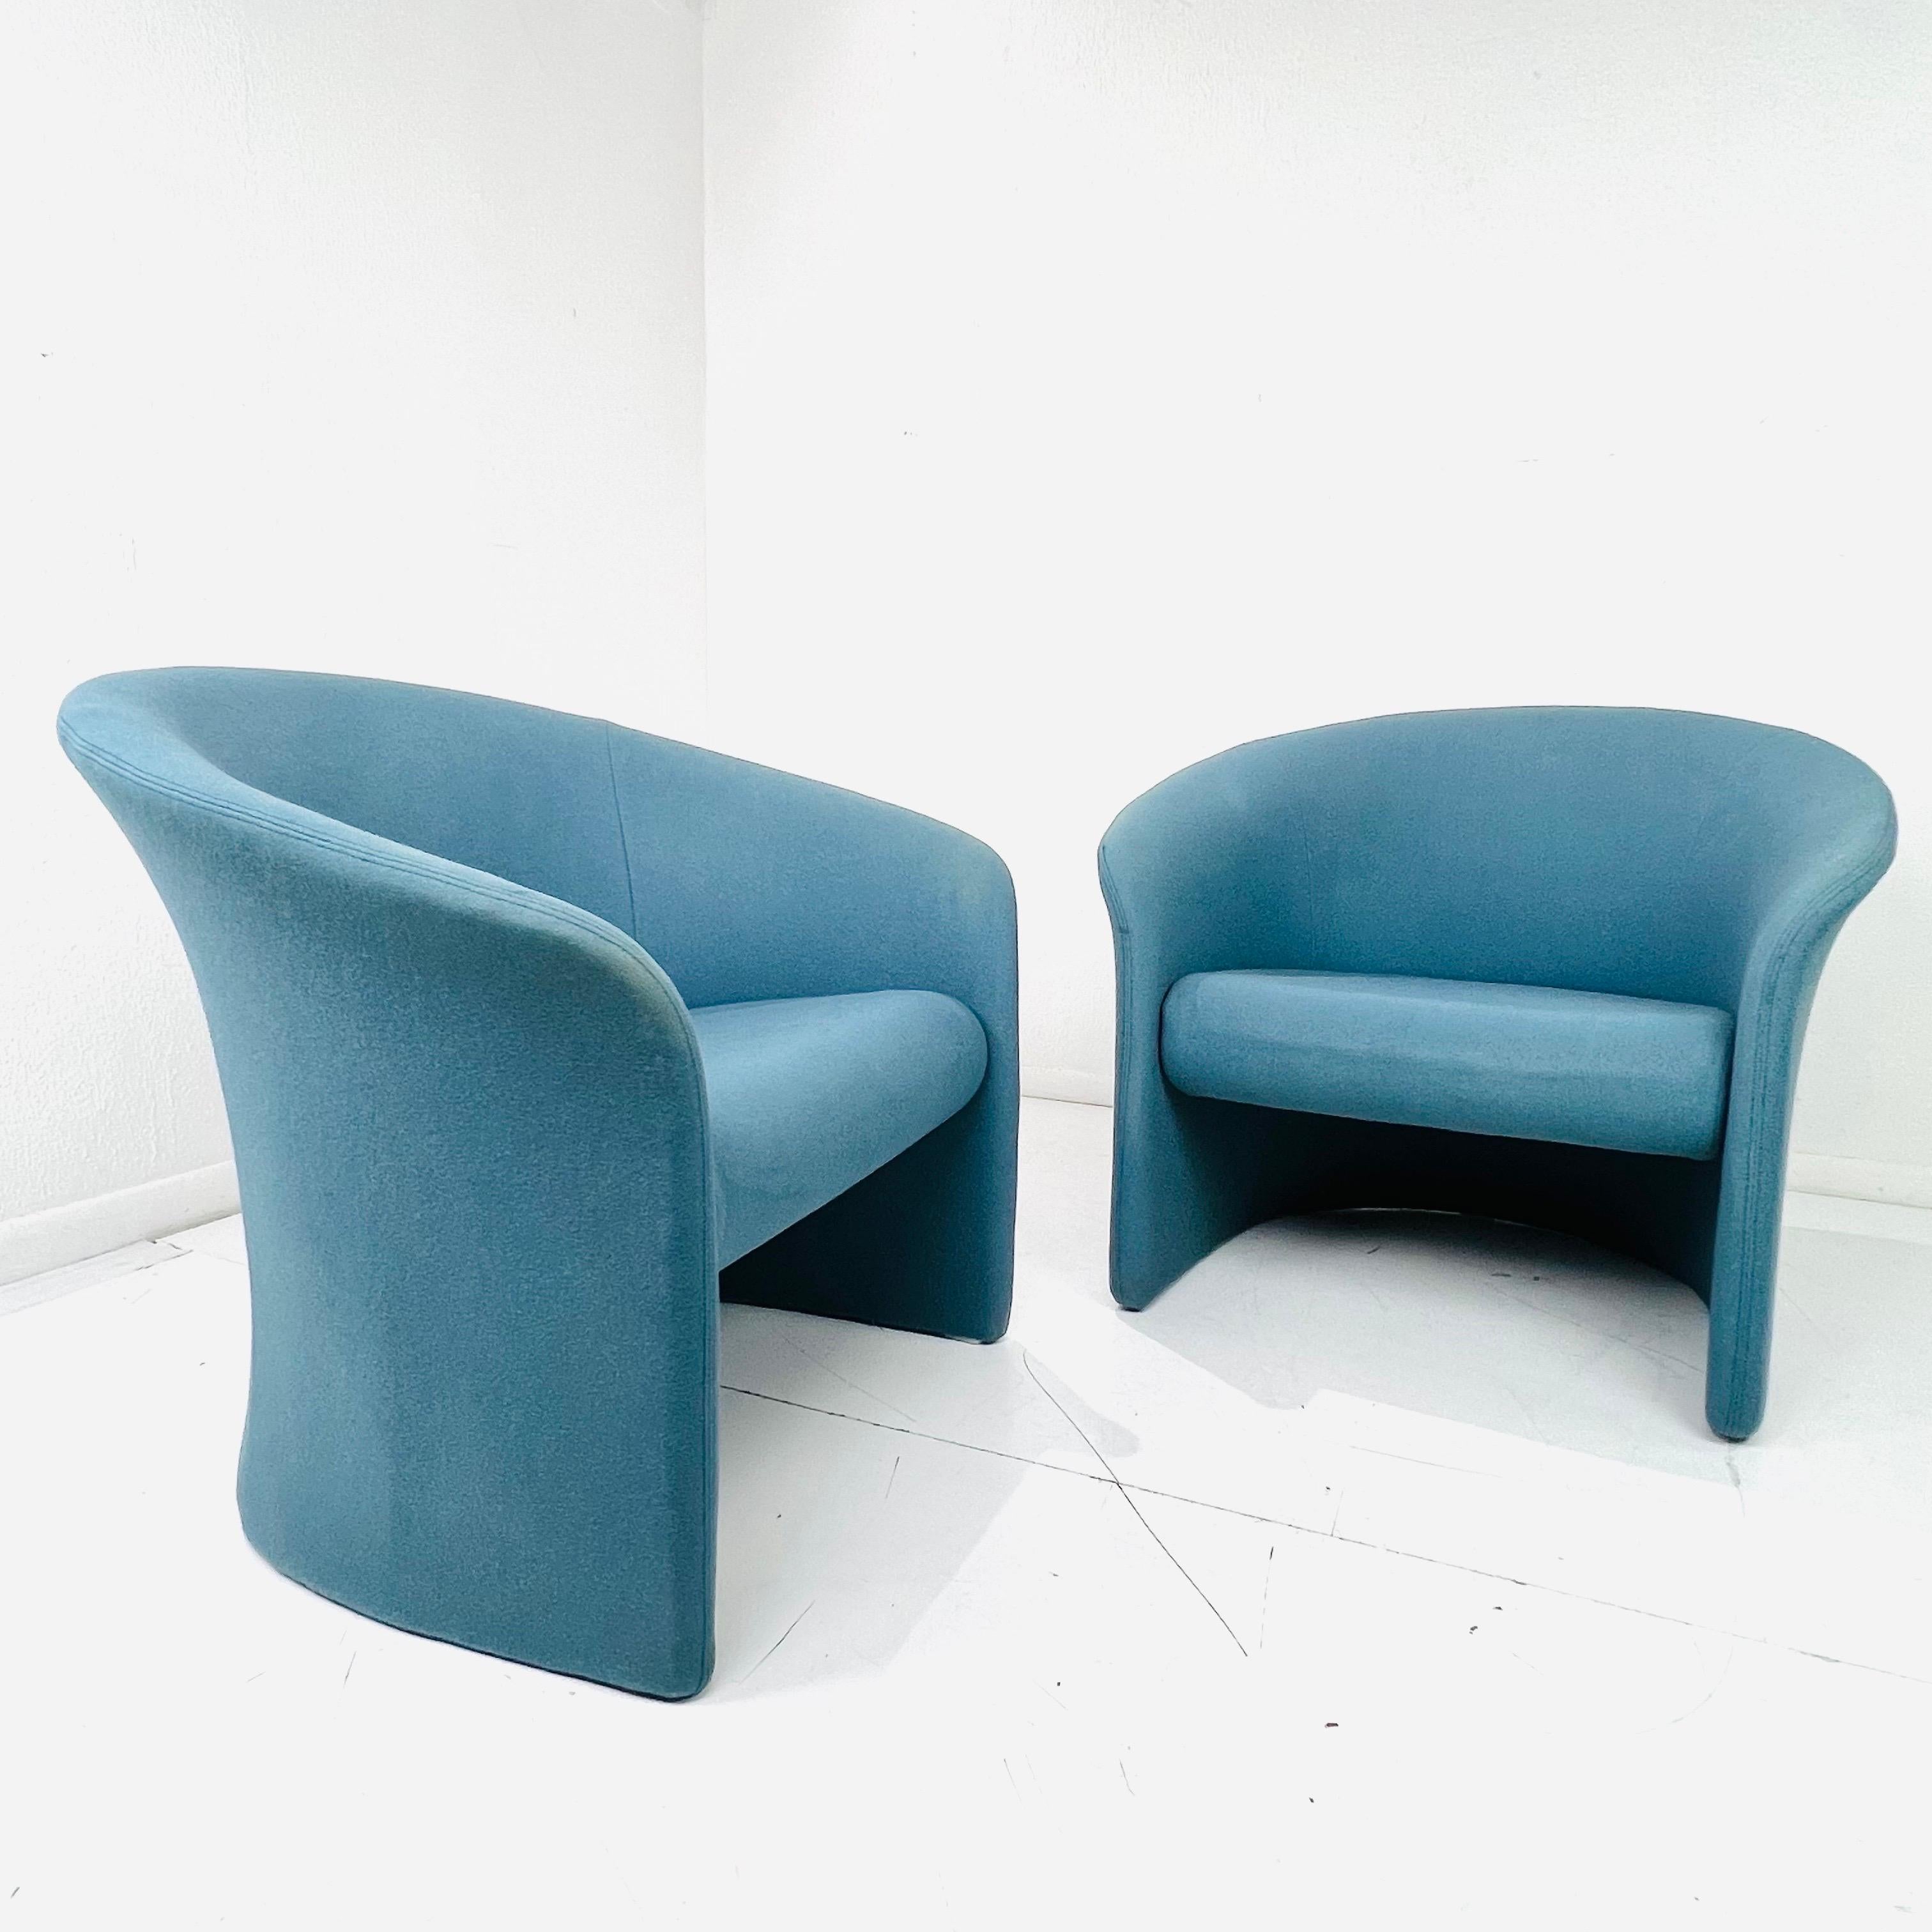 Pair of Postmodern Tub Chairs by Massimo Vignelli For Sale 7